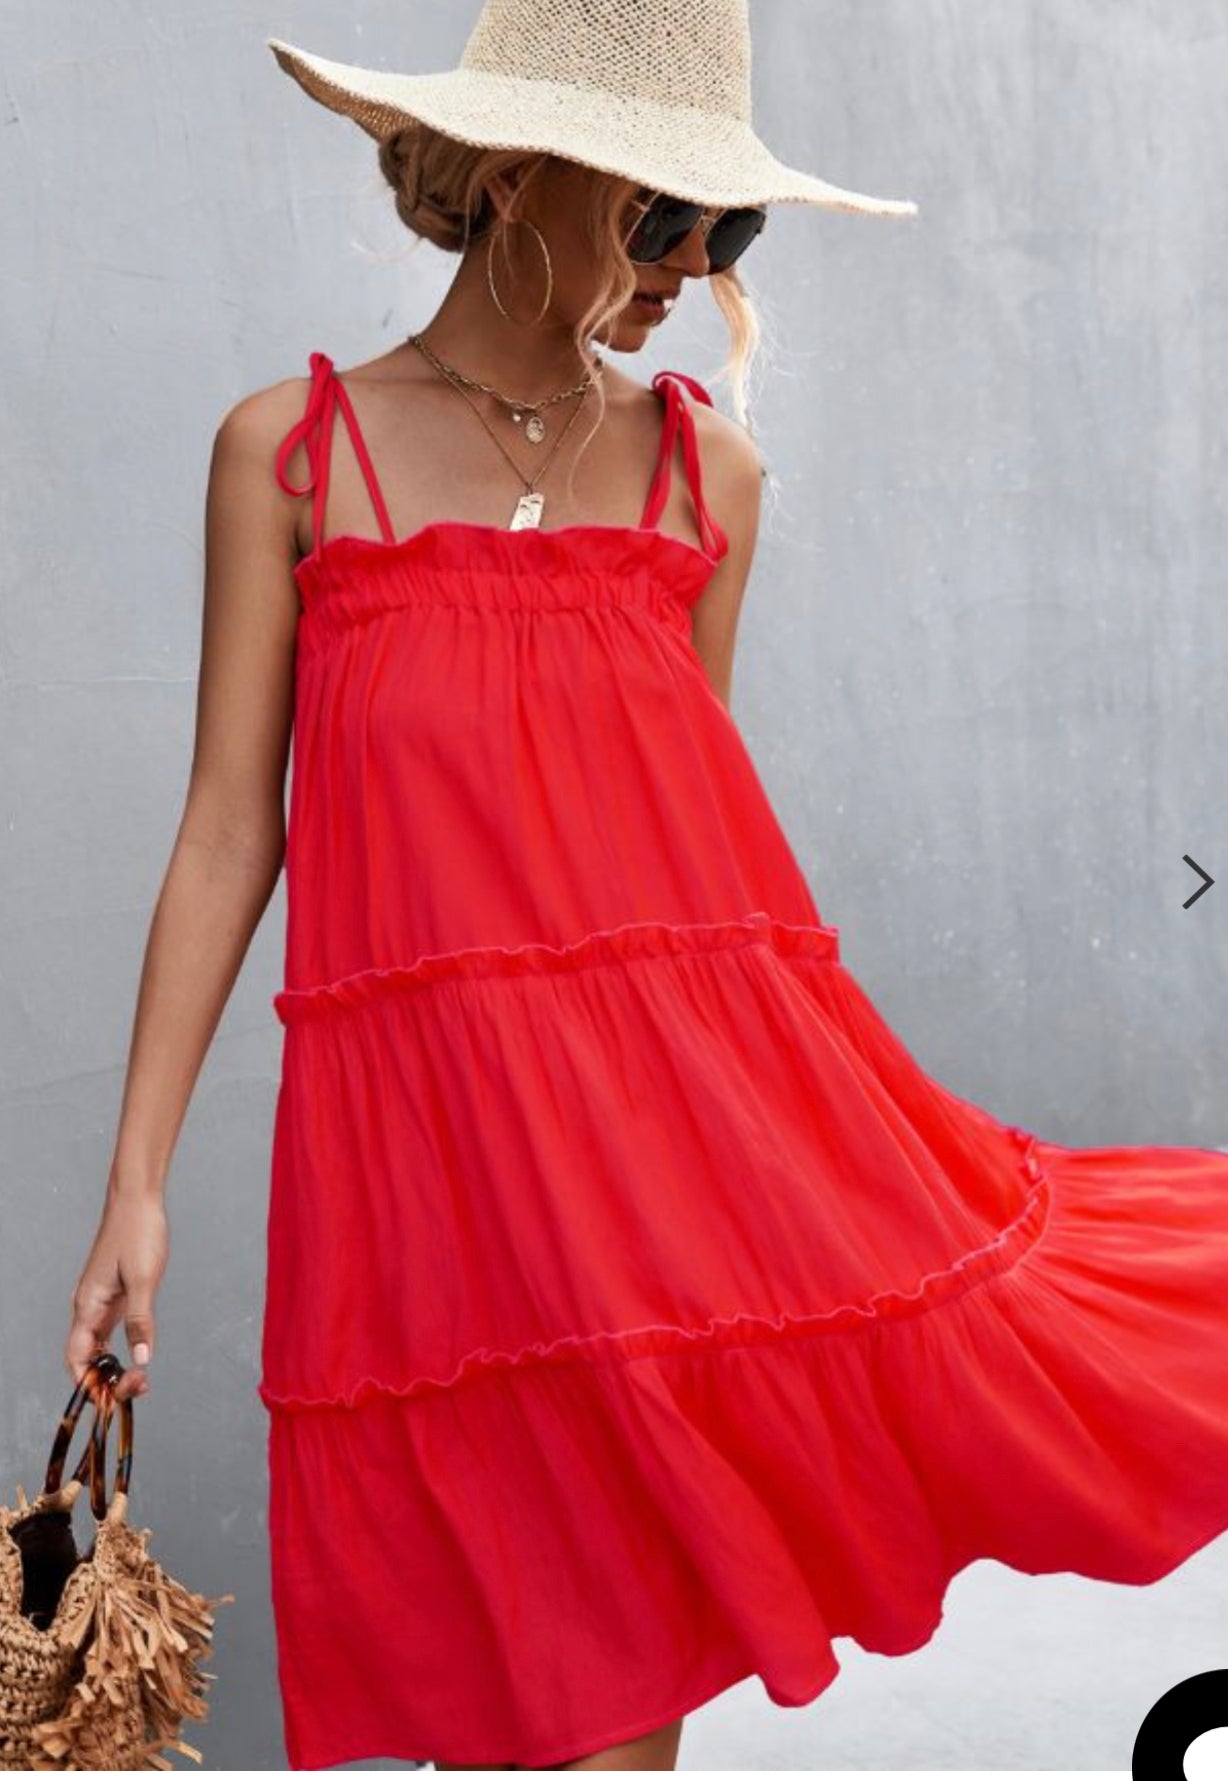 Super cute beautiful red ruffly tiered sun dress with shoulder tie straps. Nice and roomy, lightweight flowy dress that is perfect for hot sunny days. 